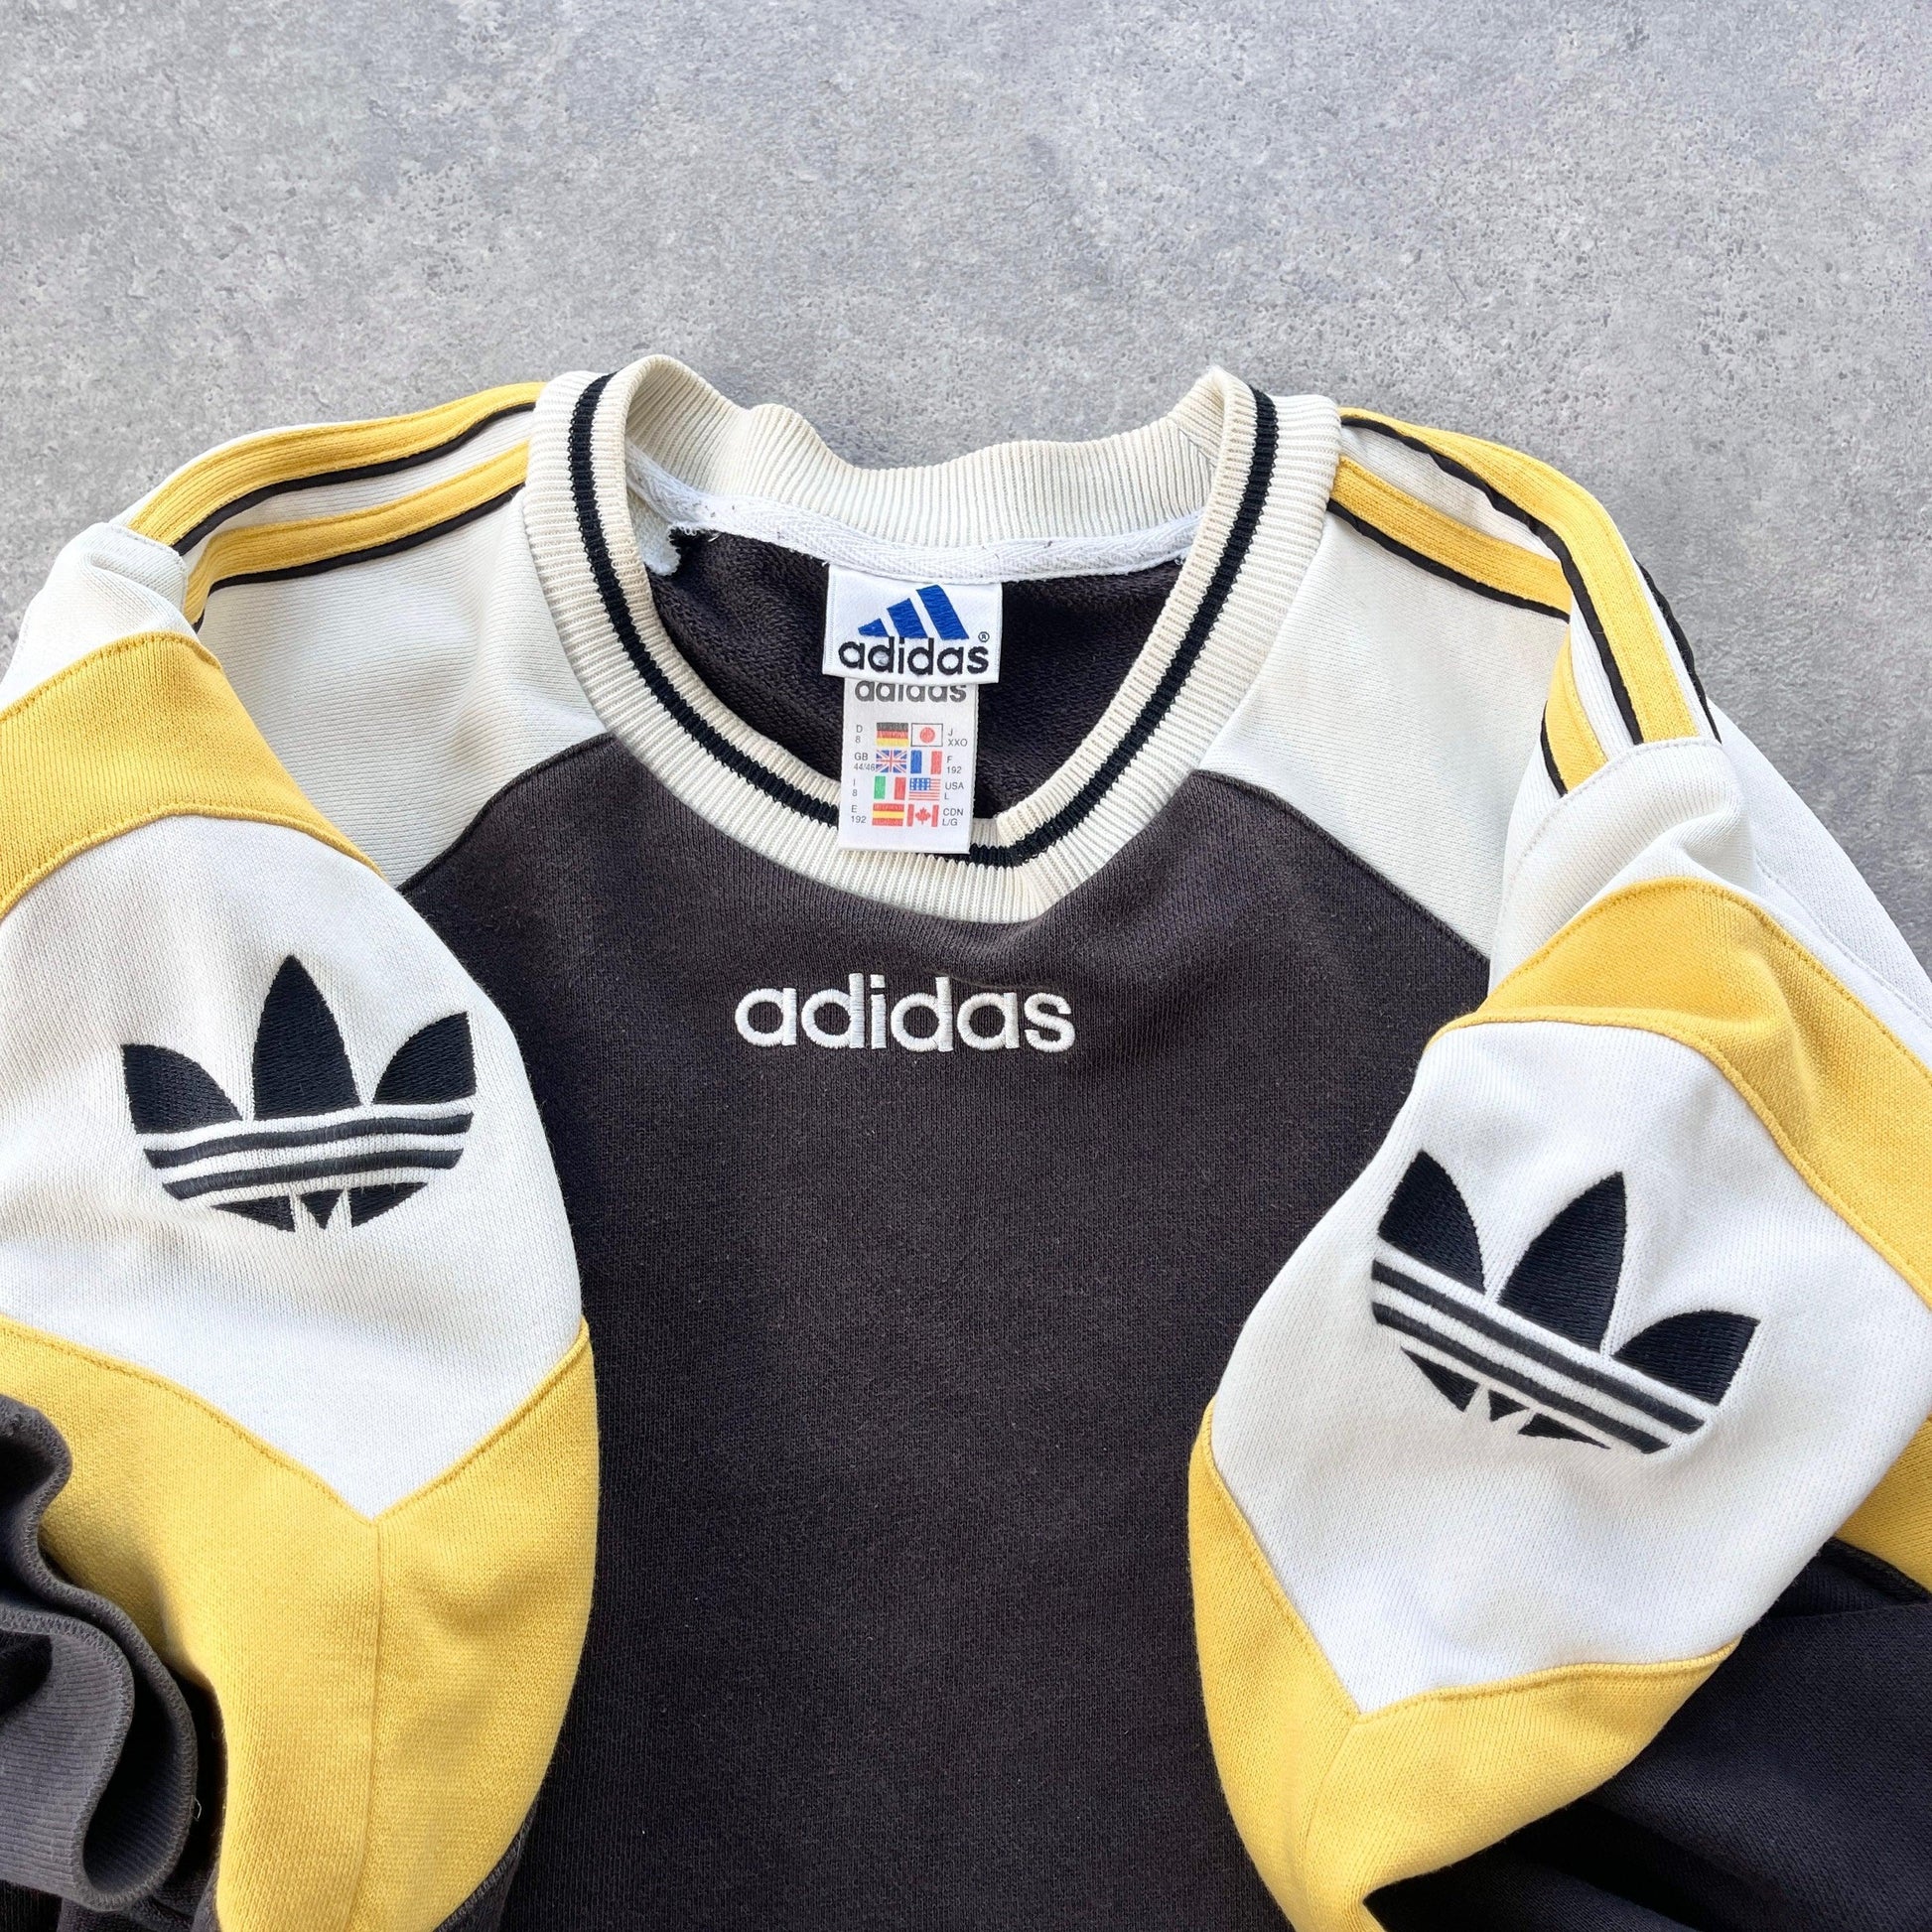 Adidas 1990s colour block embroidered sweatshirt (L) - Known Source